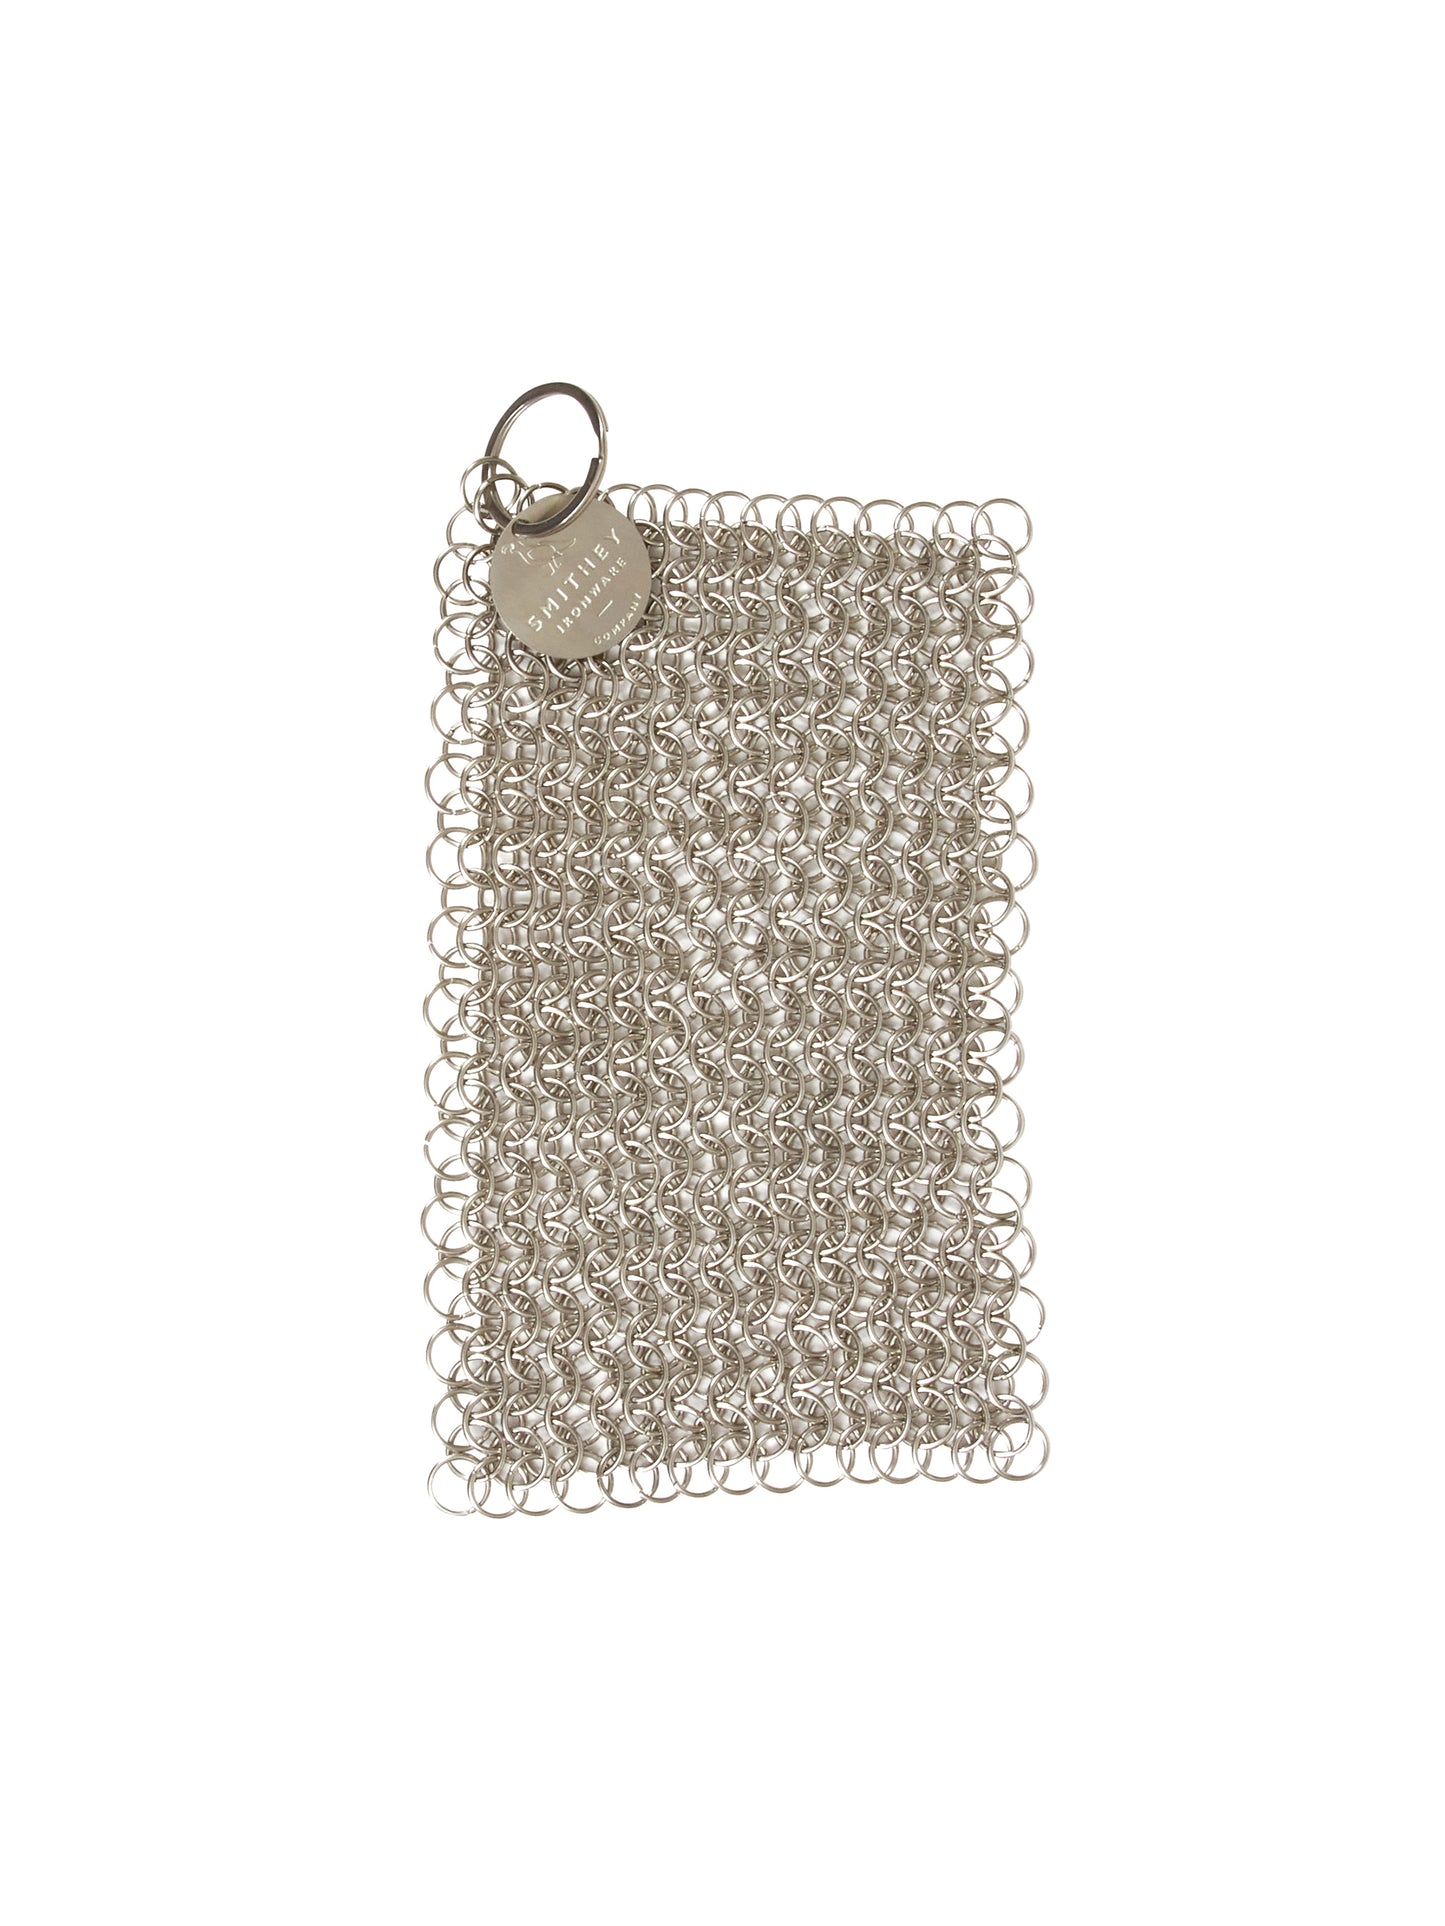 Smithey Chain Mail Scrubber Weston Table